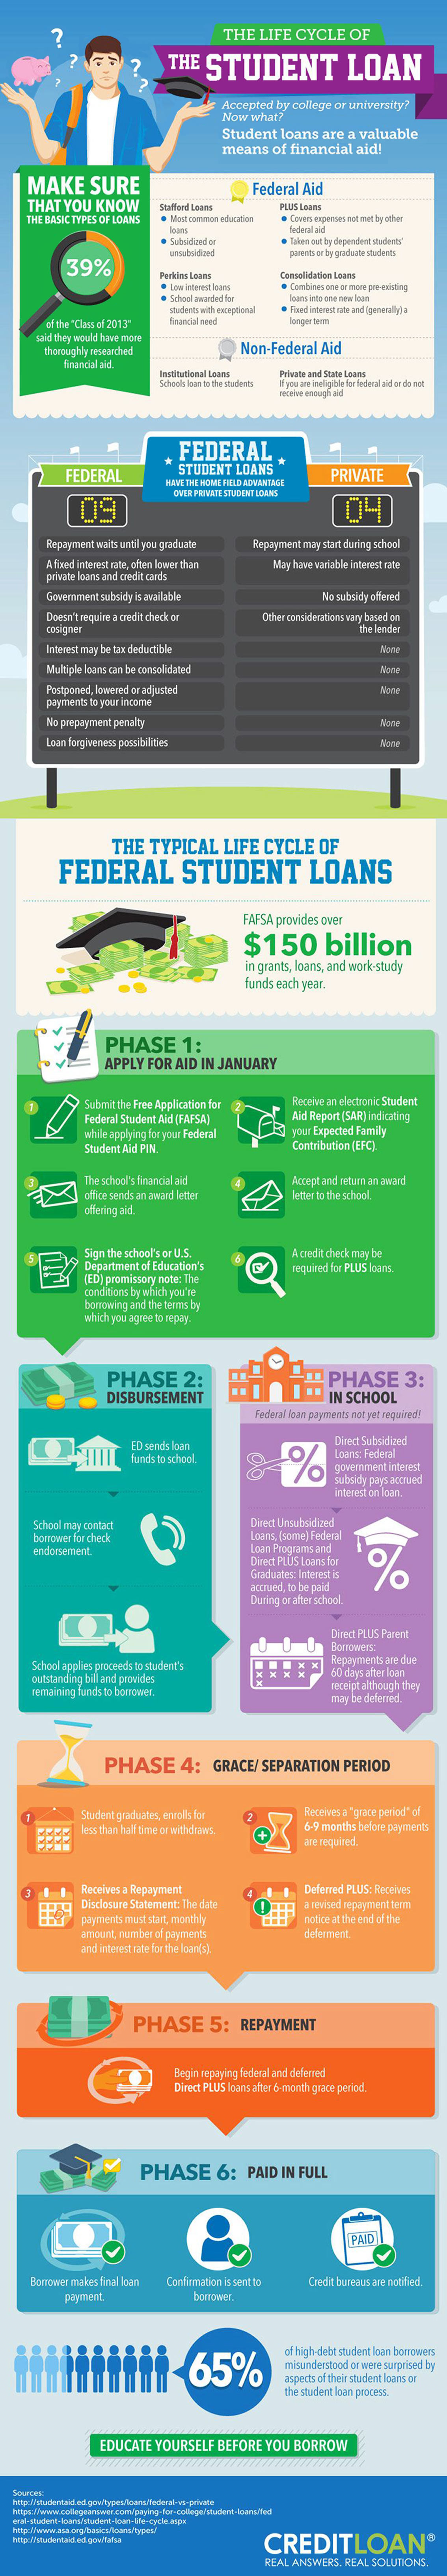 Life Cycle of Federal Student Loans - College Education Infographic